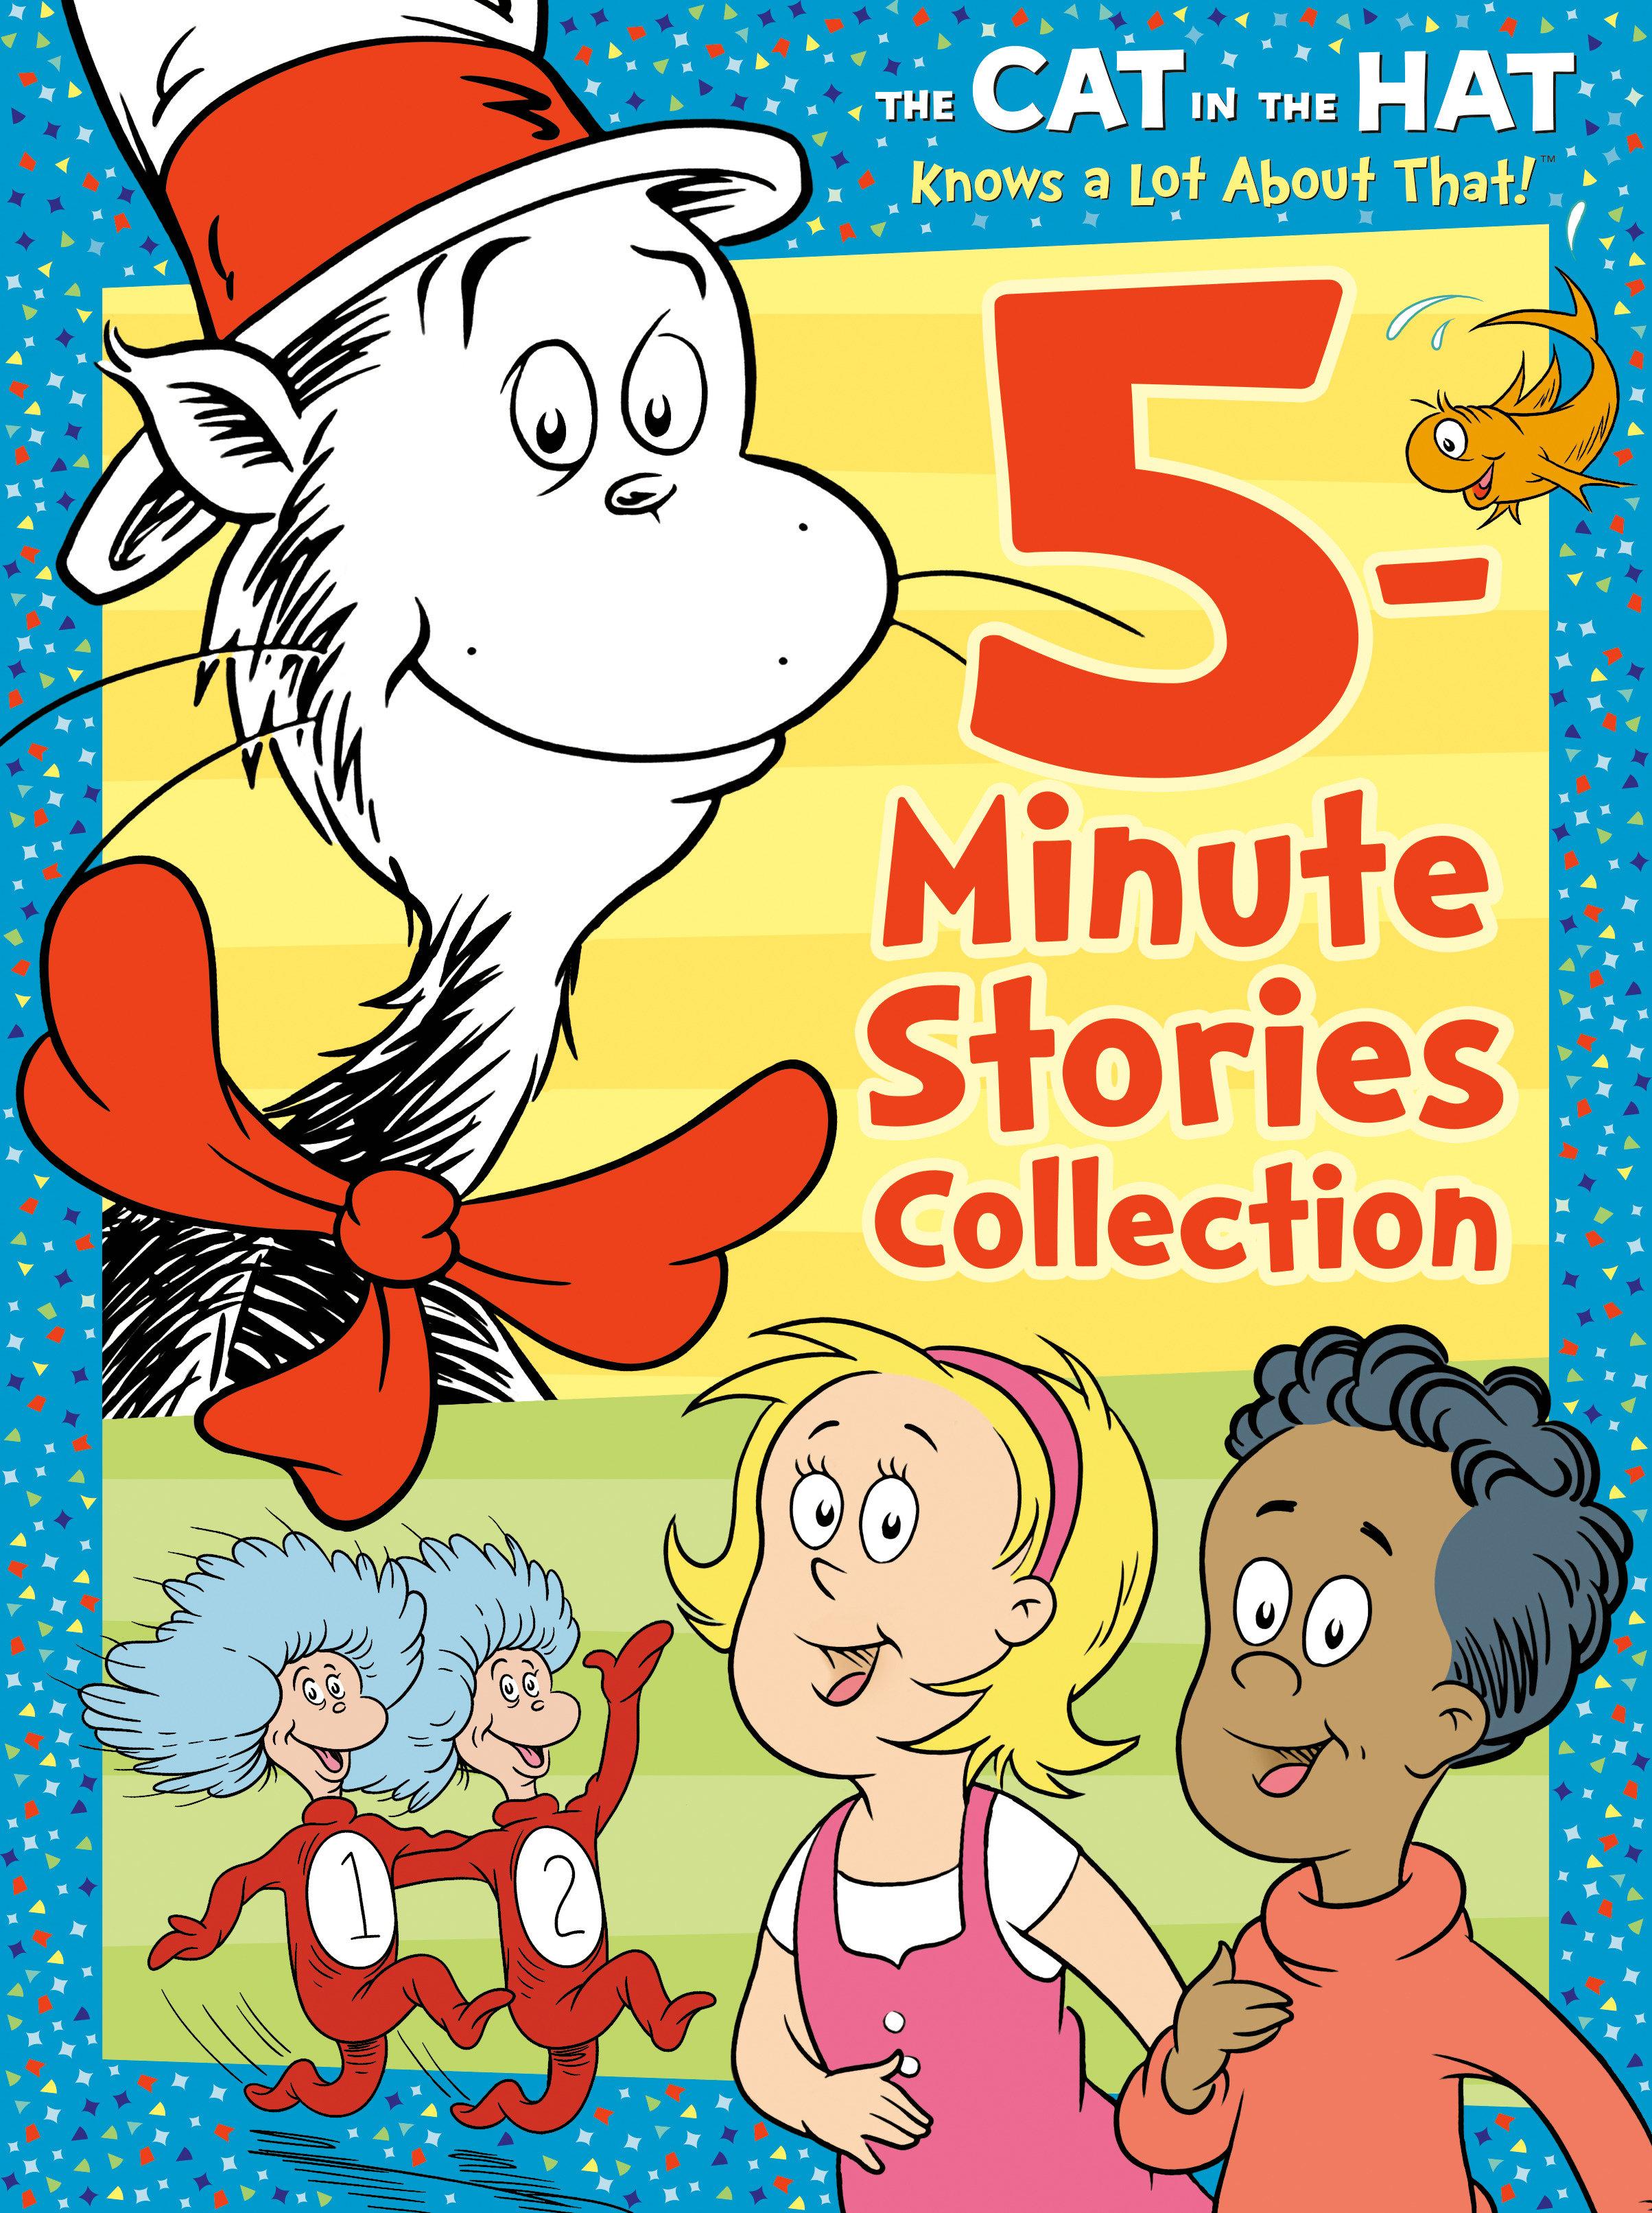 The Cat in the Hat Knows a Lot About That 5-Minute Stories Collection (Dr. Seuss /The Cat in the Hat Knows a Lot About That) - Random House